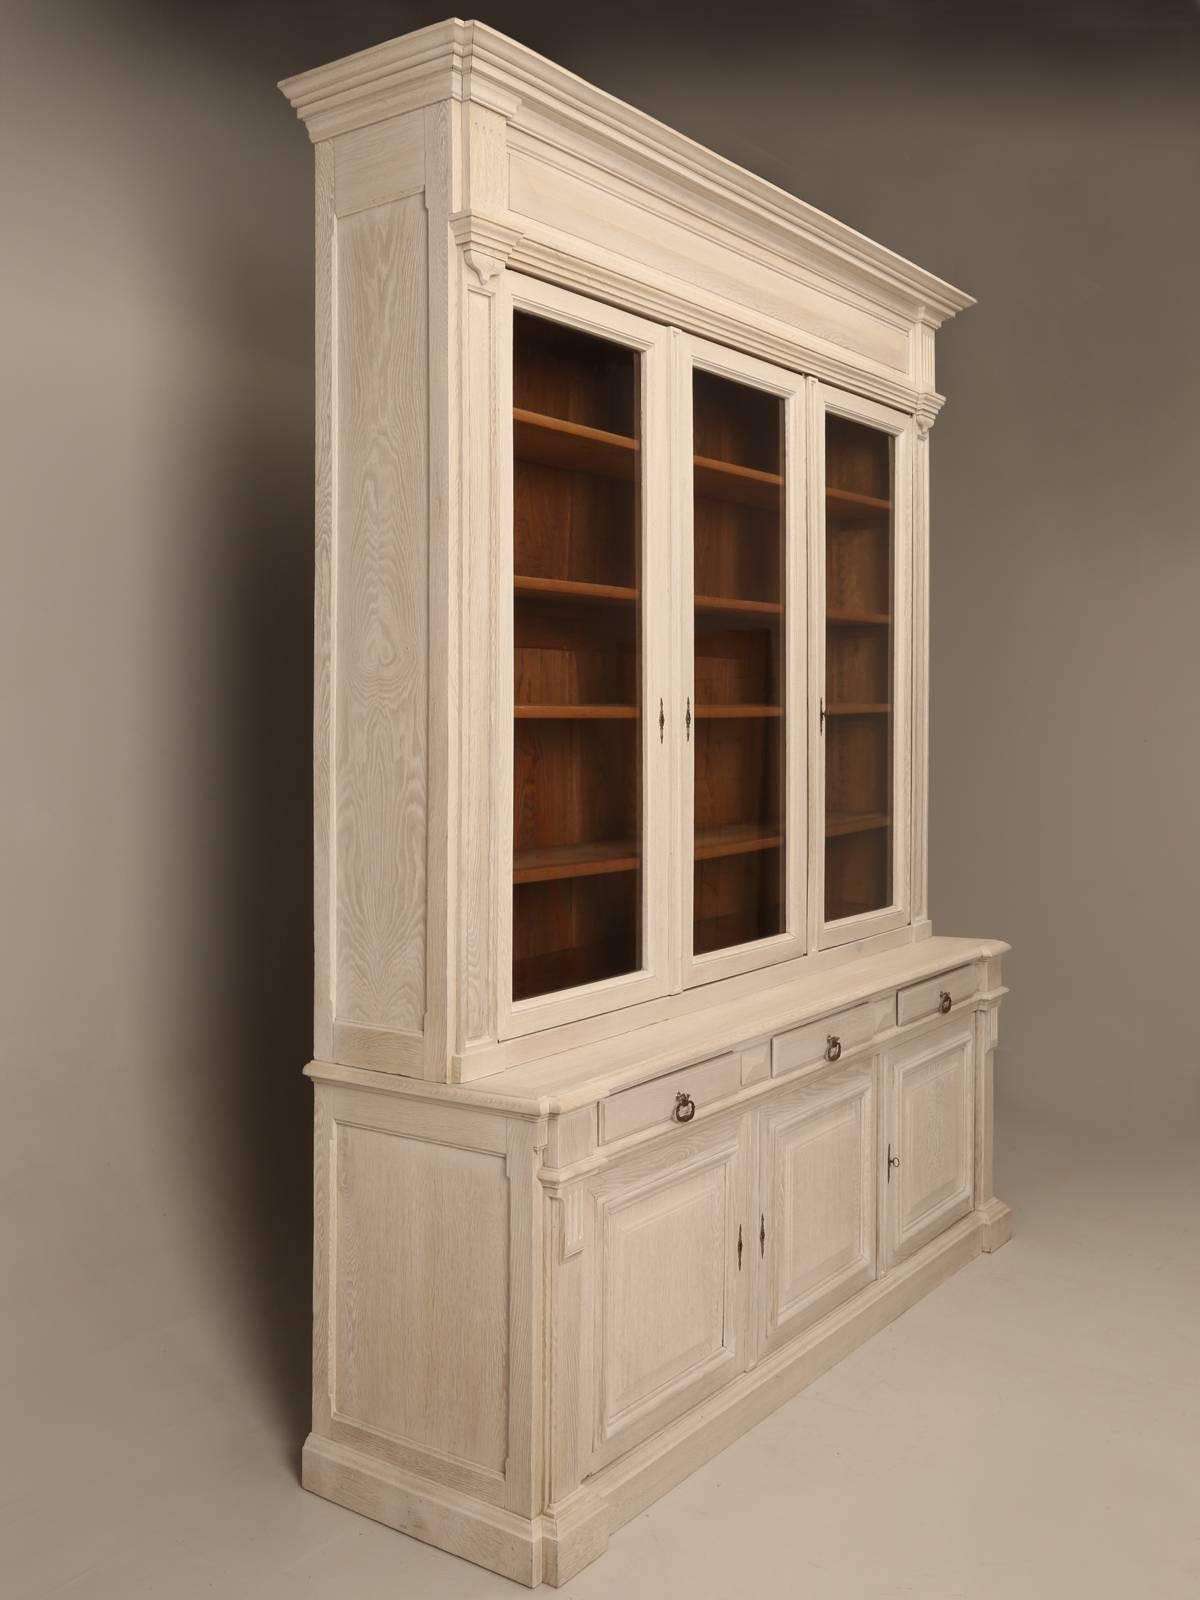 Antique French oak bookcase, or as the French would call it, a bibliotheque, but whatever you would like to refer to it as, it was built with quality in mind, probably in the late 1800s. Even the drawer boxes have beautiful French walnut bottoms and